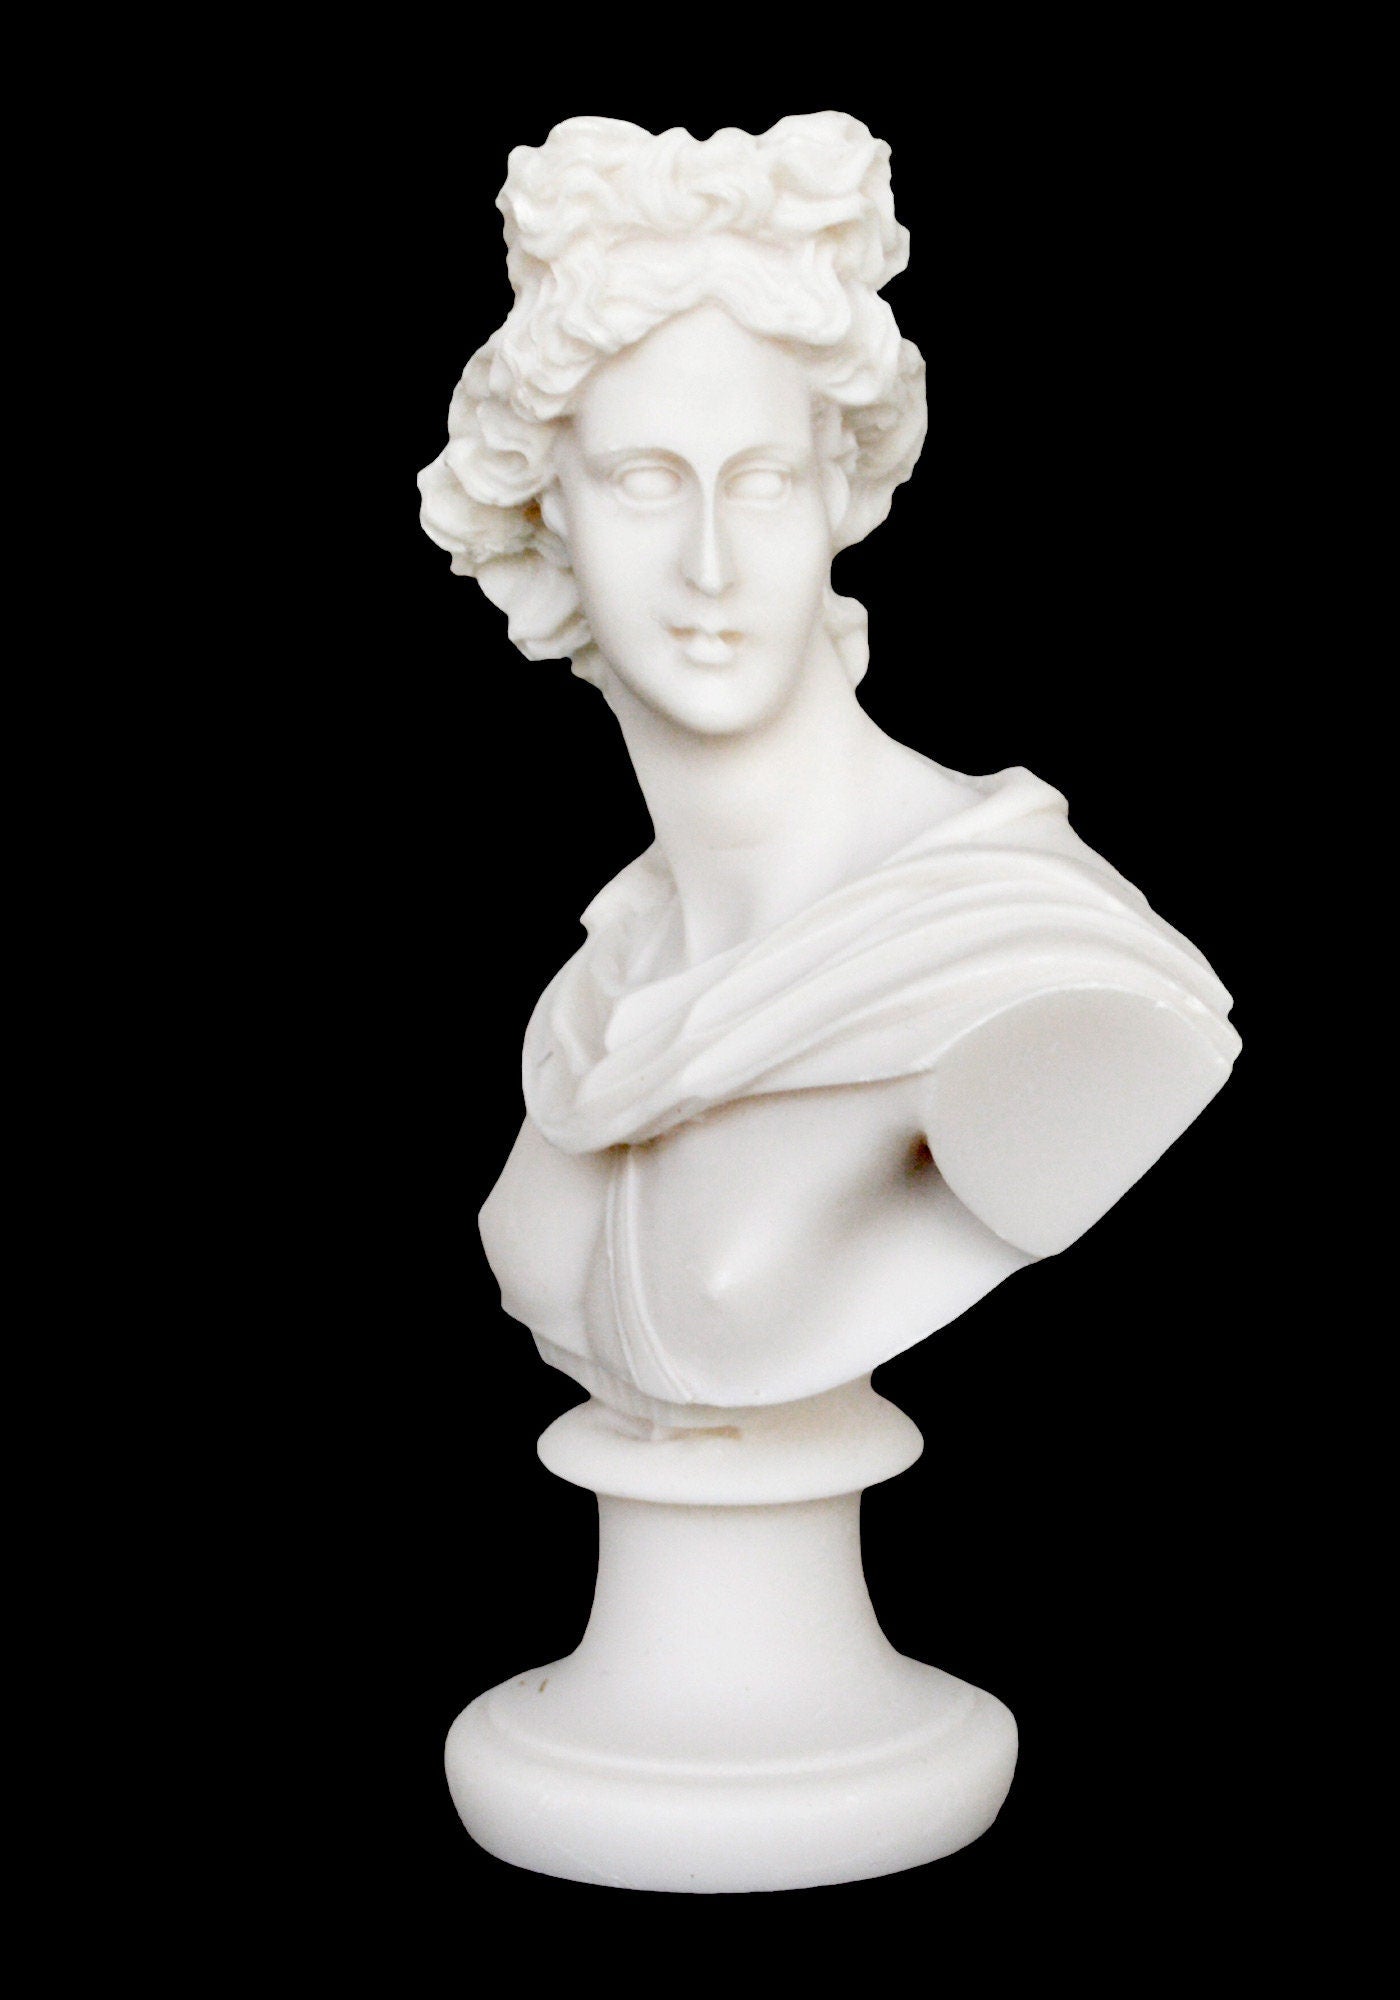 Apollo - Greek Roman God of Music, Poetry, Sun, Light, Prophecy and Healing   - Alabaster Bust